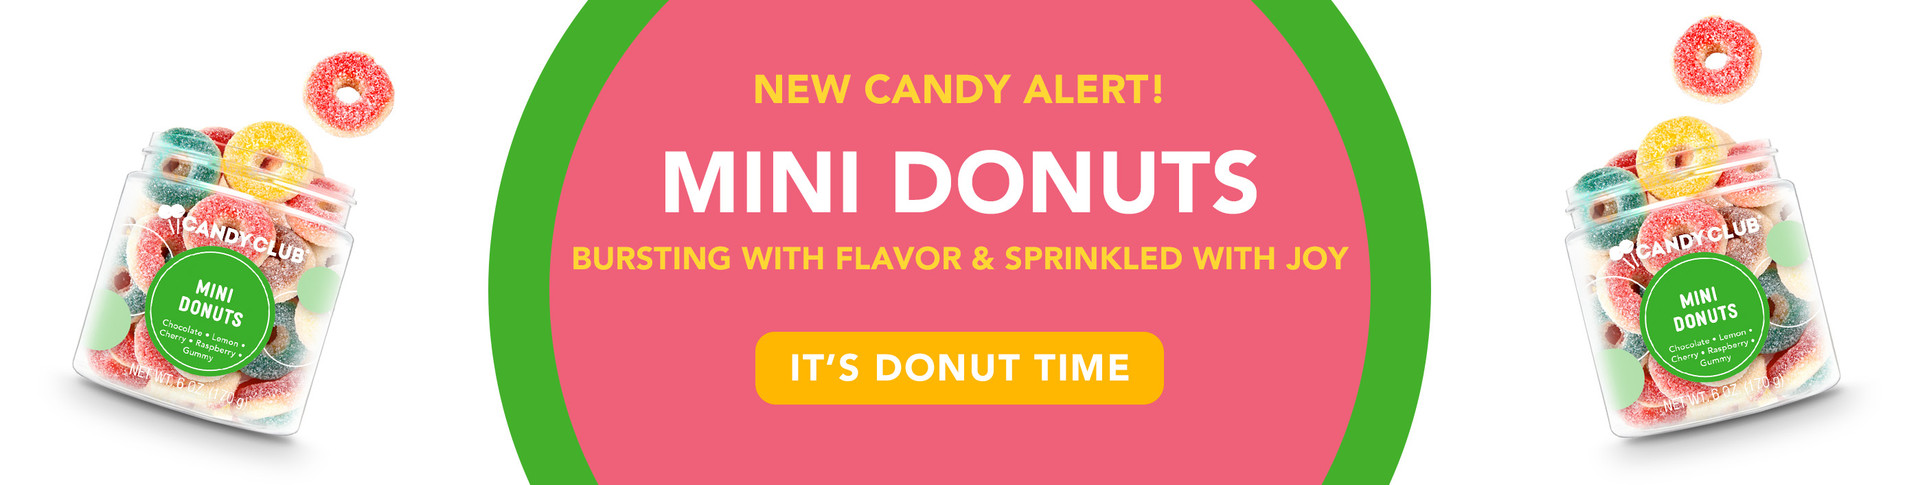 New Candy Alert! Mini Donuts. Bursting with flavor & splrinkled with joy. It's Donut Time.